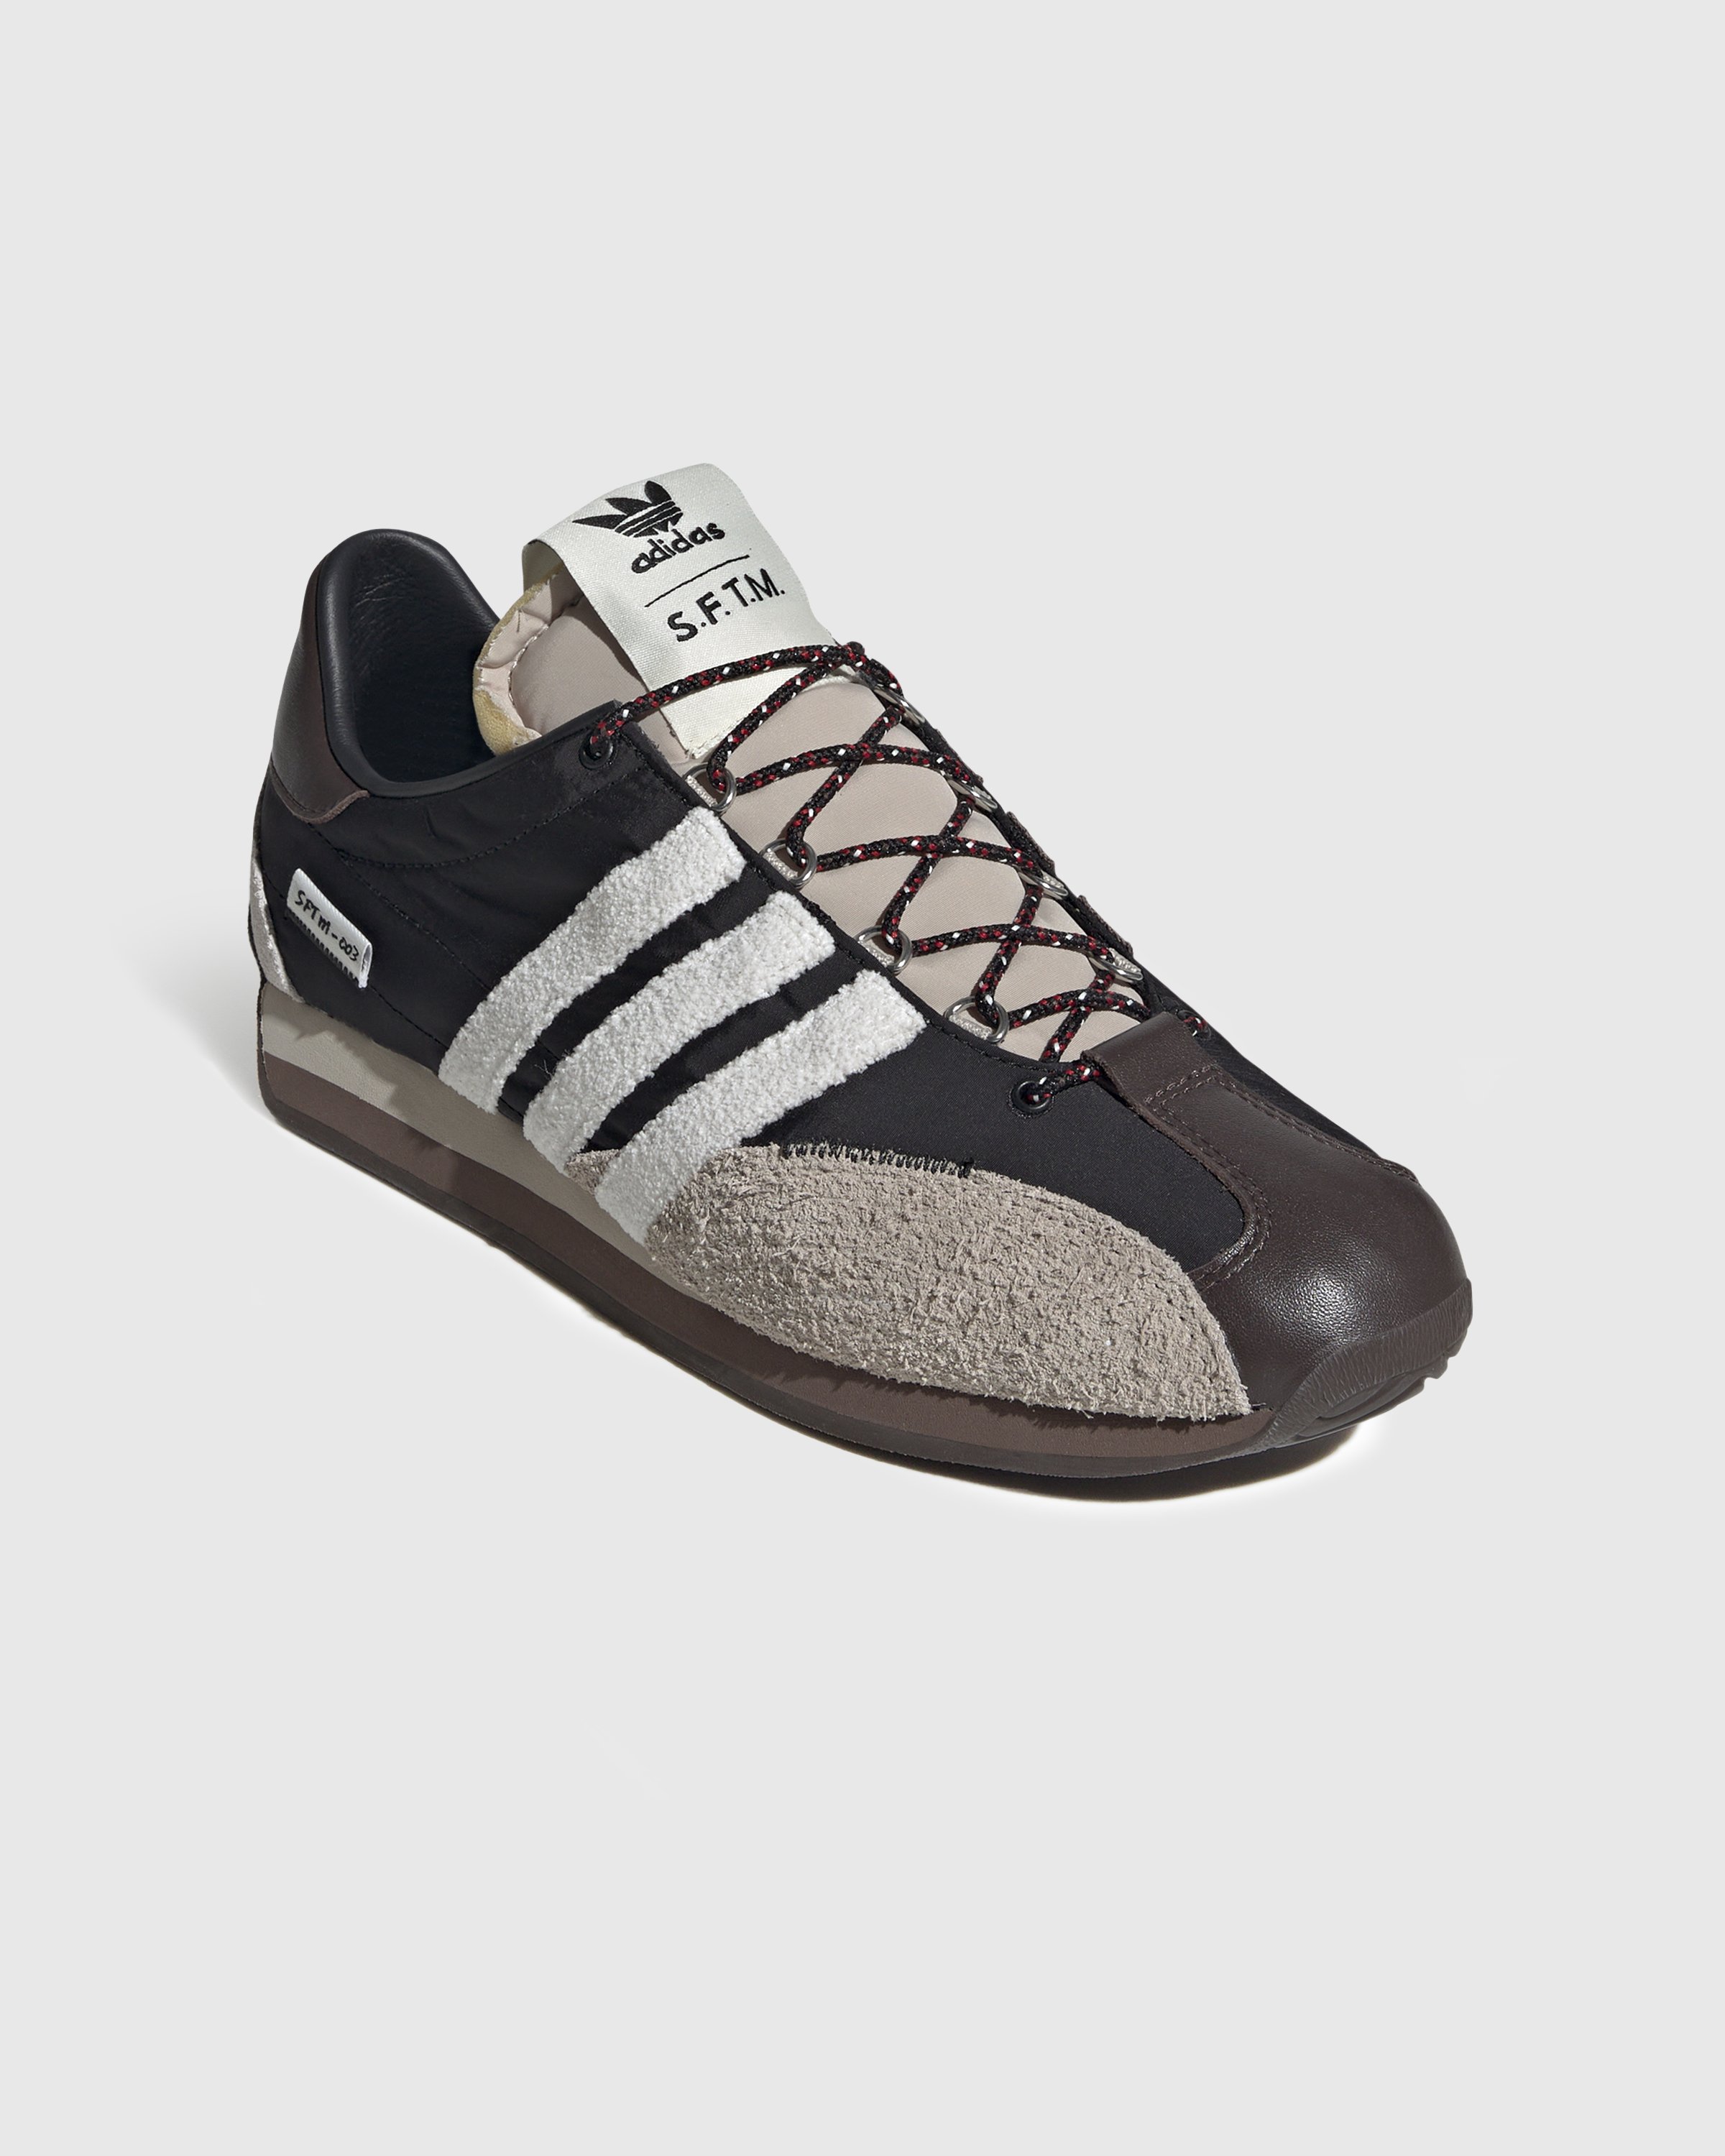 Adidas x Song For The Mute - Country OG SFTM Black - Footwear - Black - Image 3